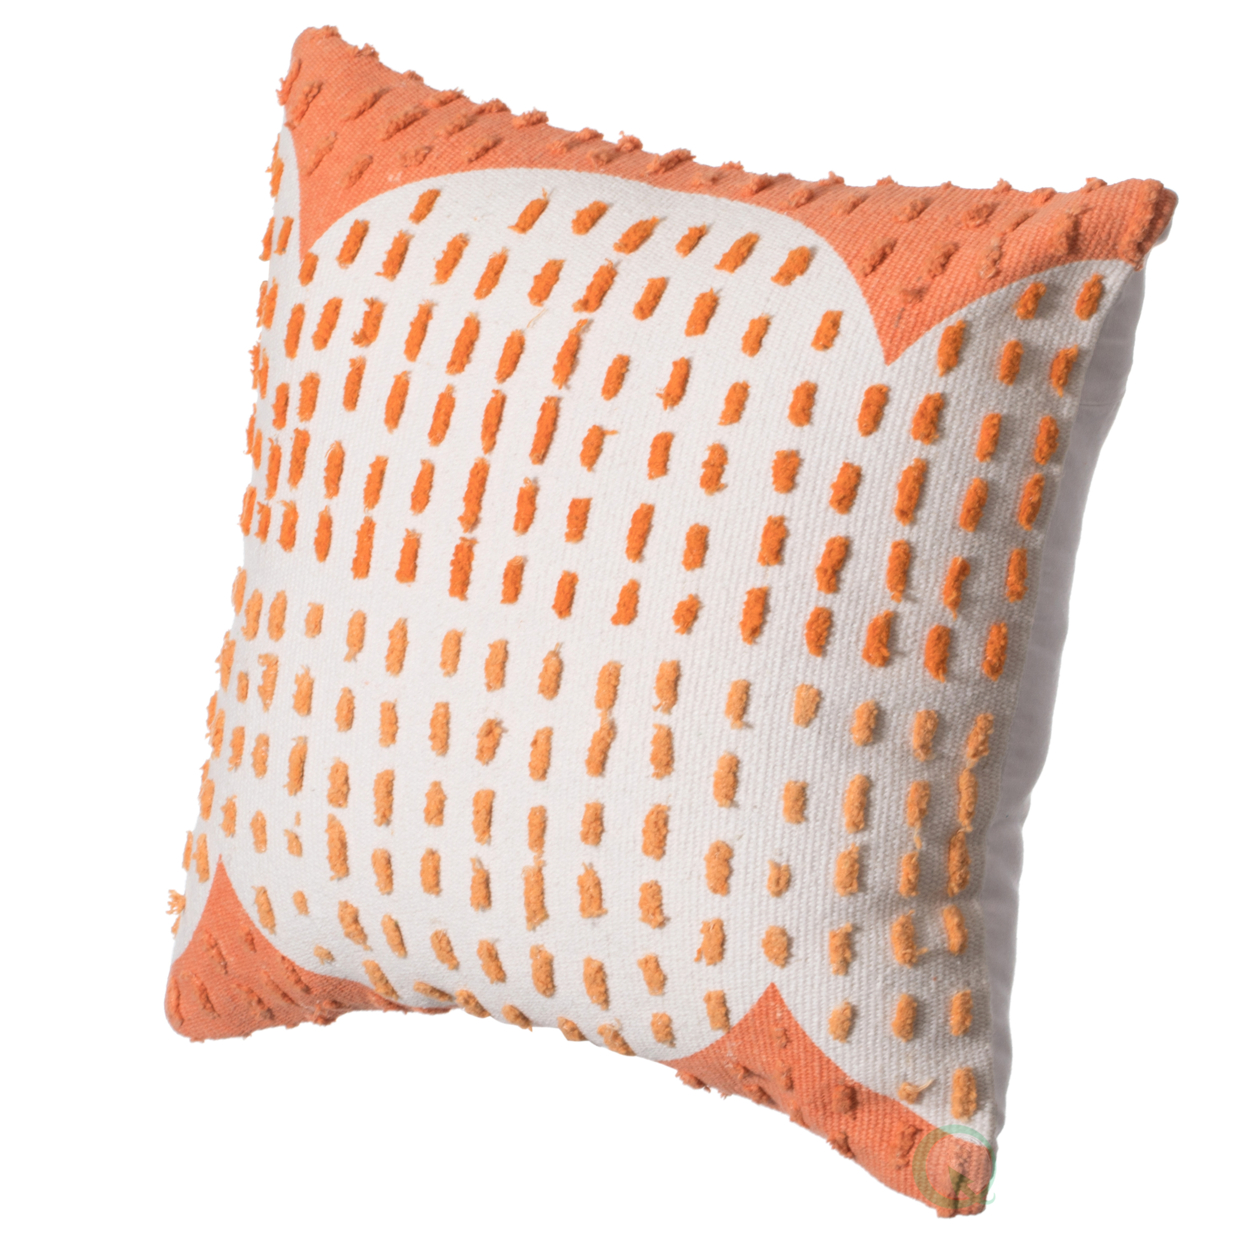 16" Handwoven Cotton Throw Pillow Cover with Ribbed Line Dots and Wave Border - coral